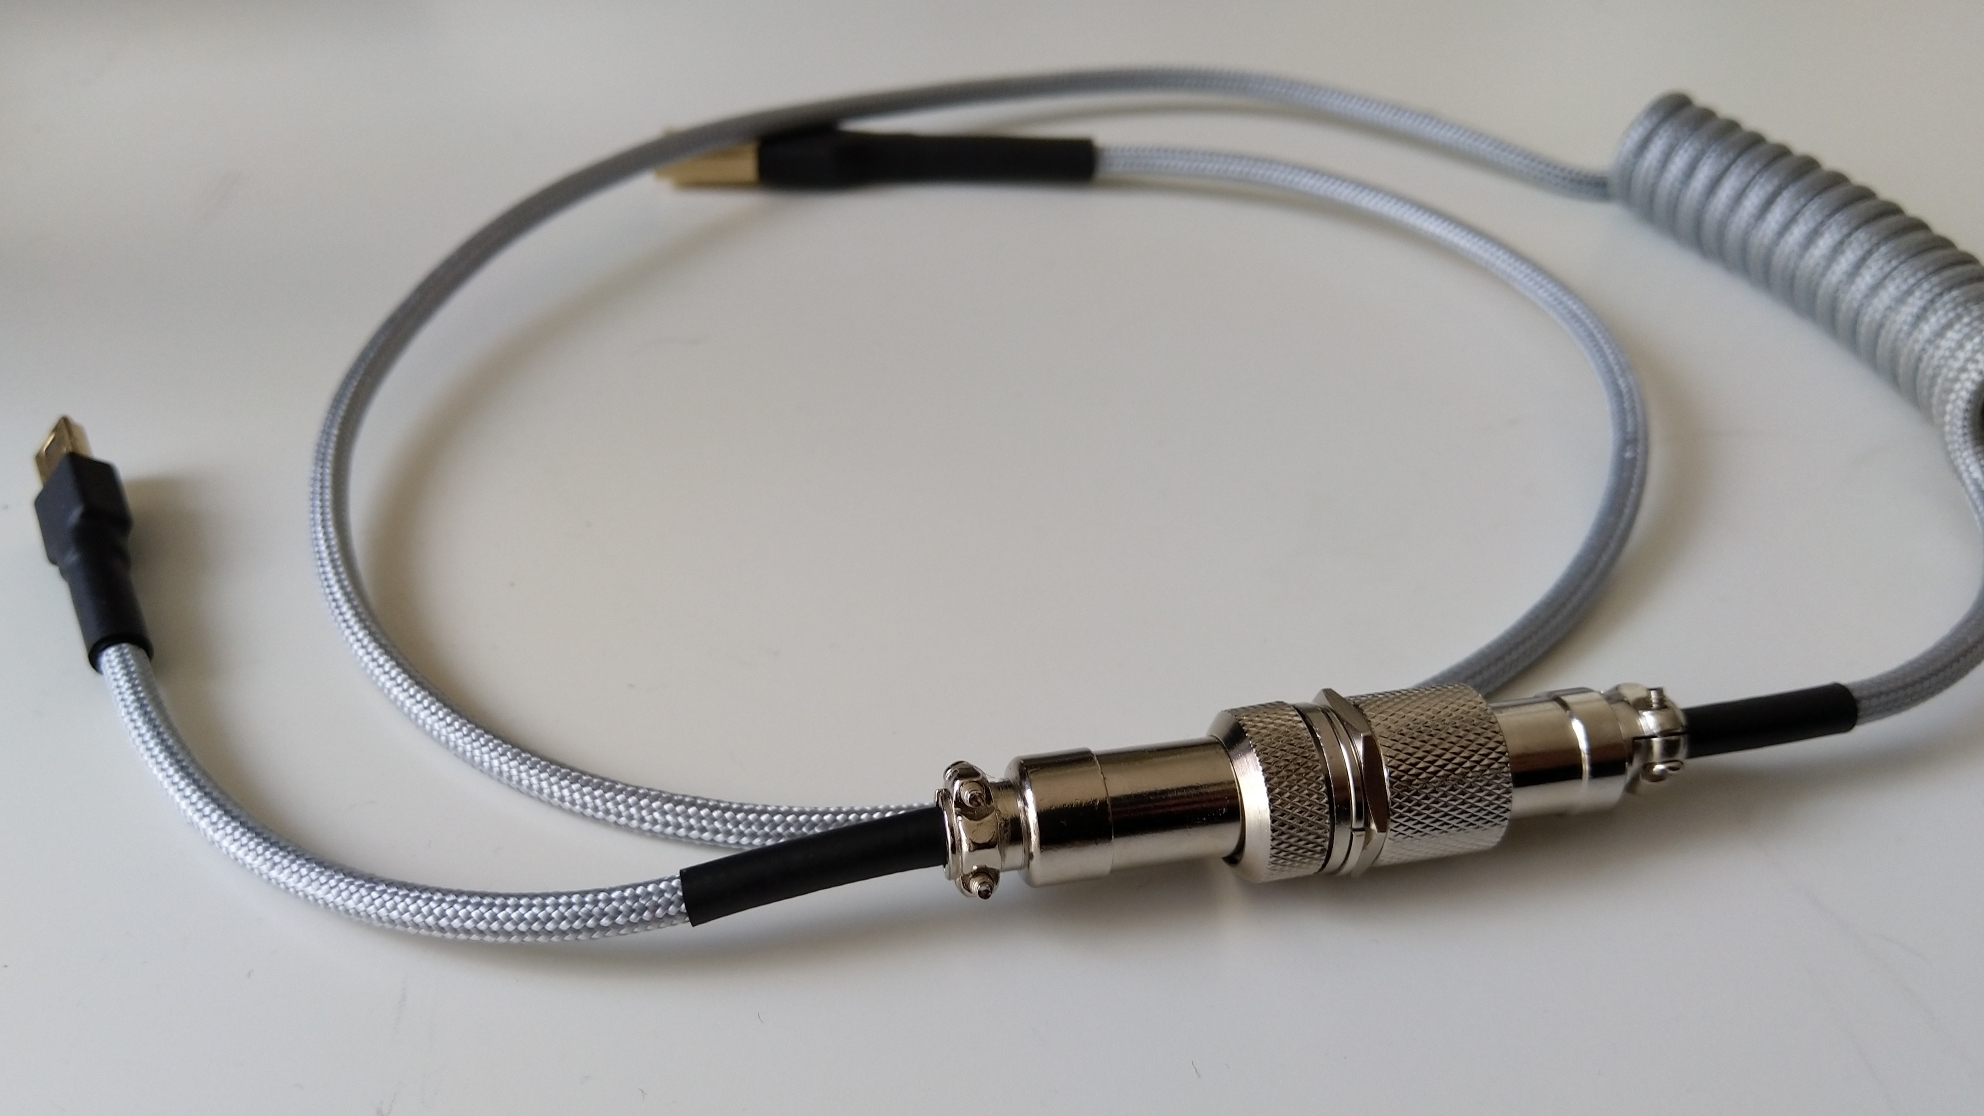 Need USB cable? Build one! –